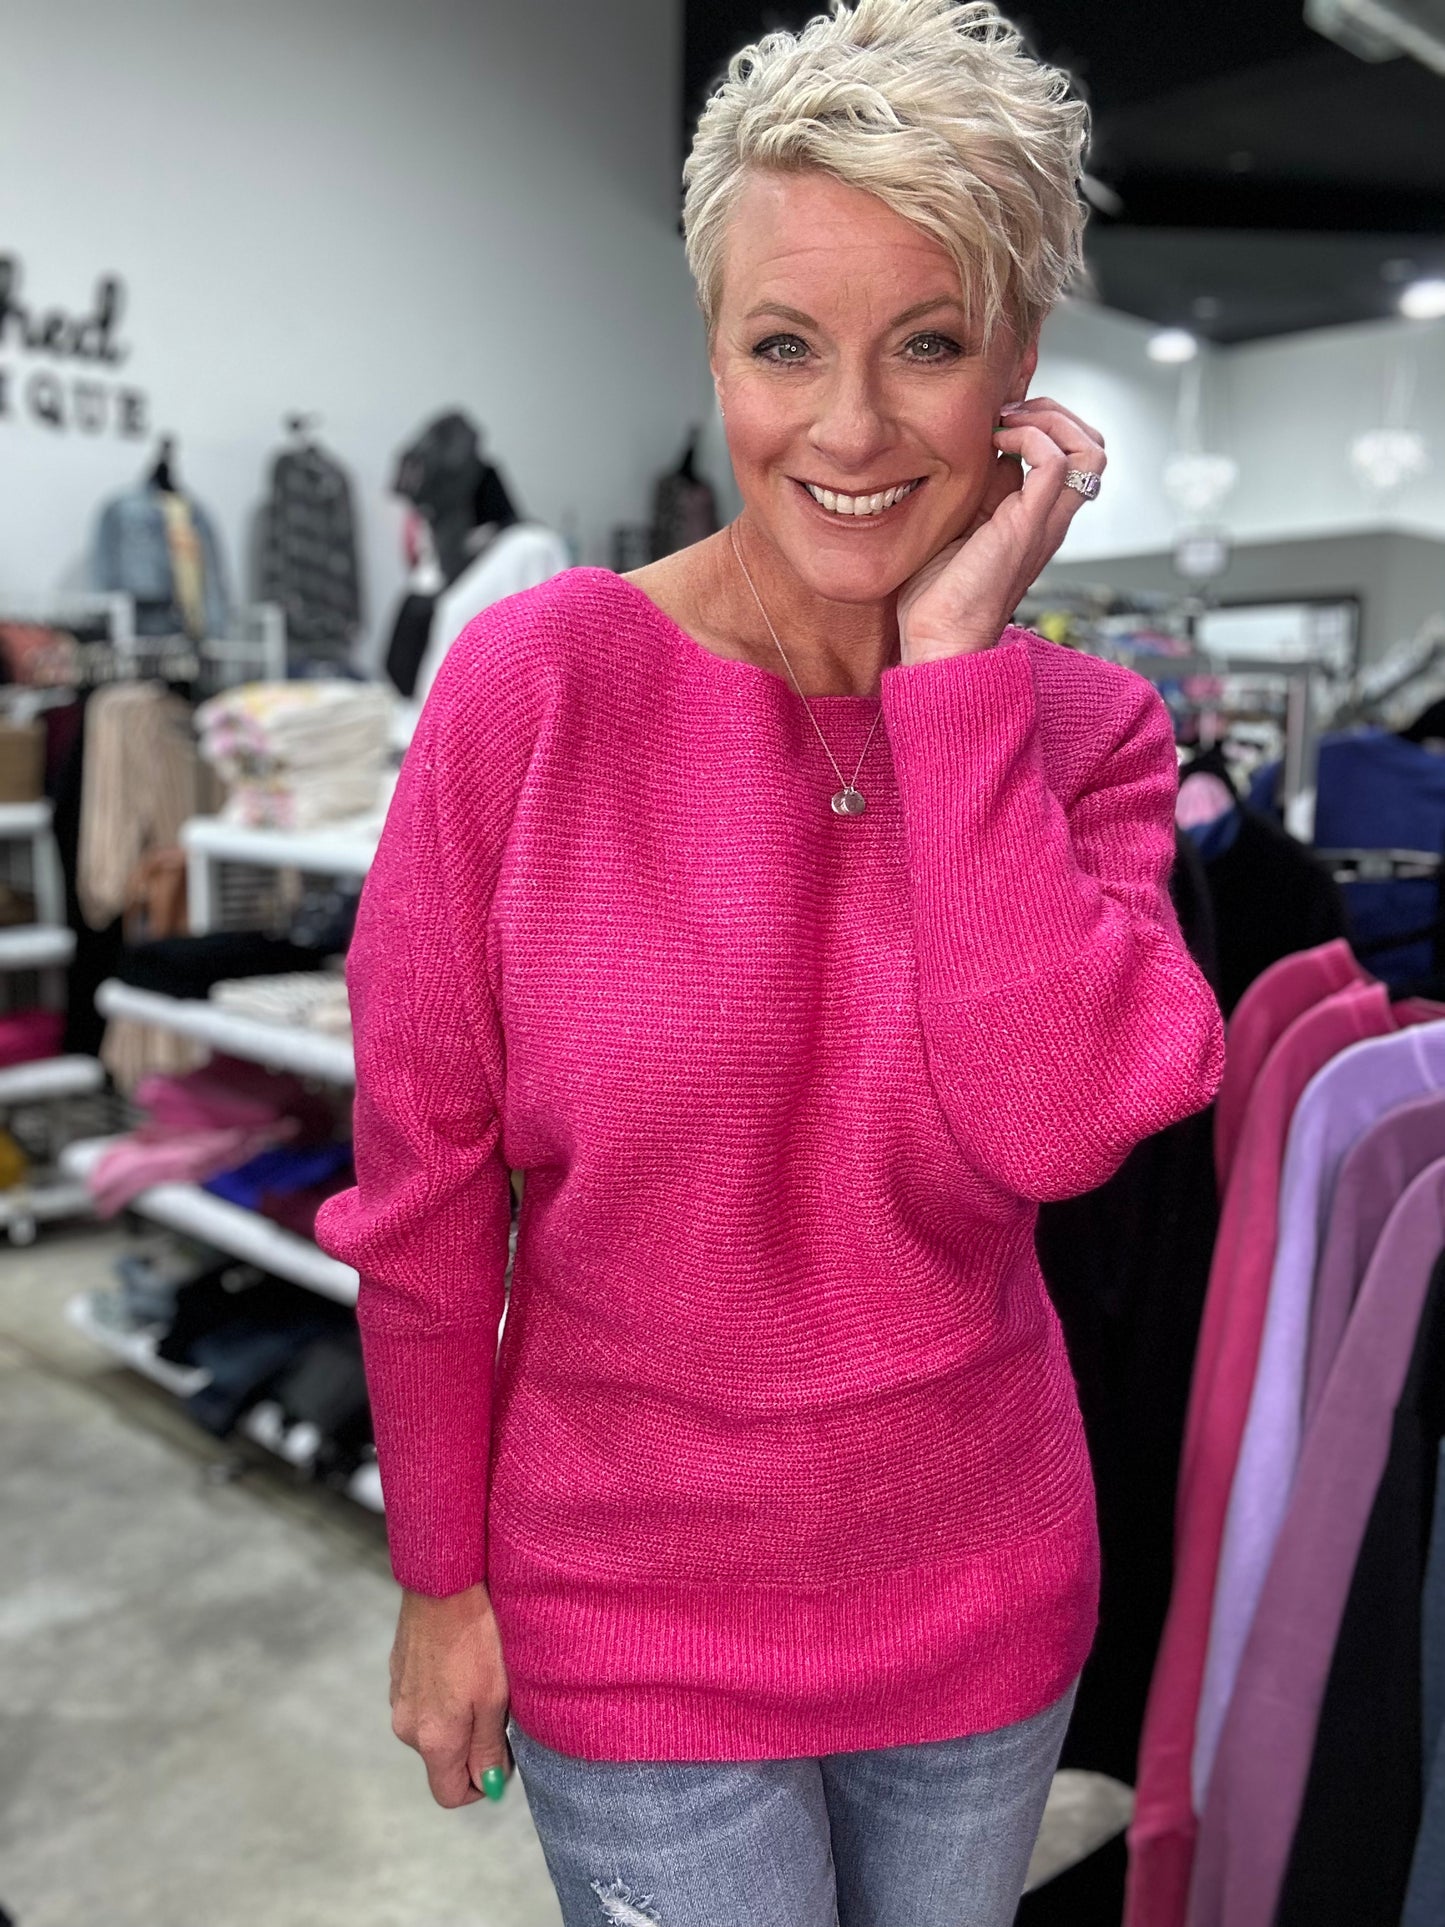 The Berry Pink Sweater